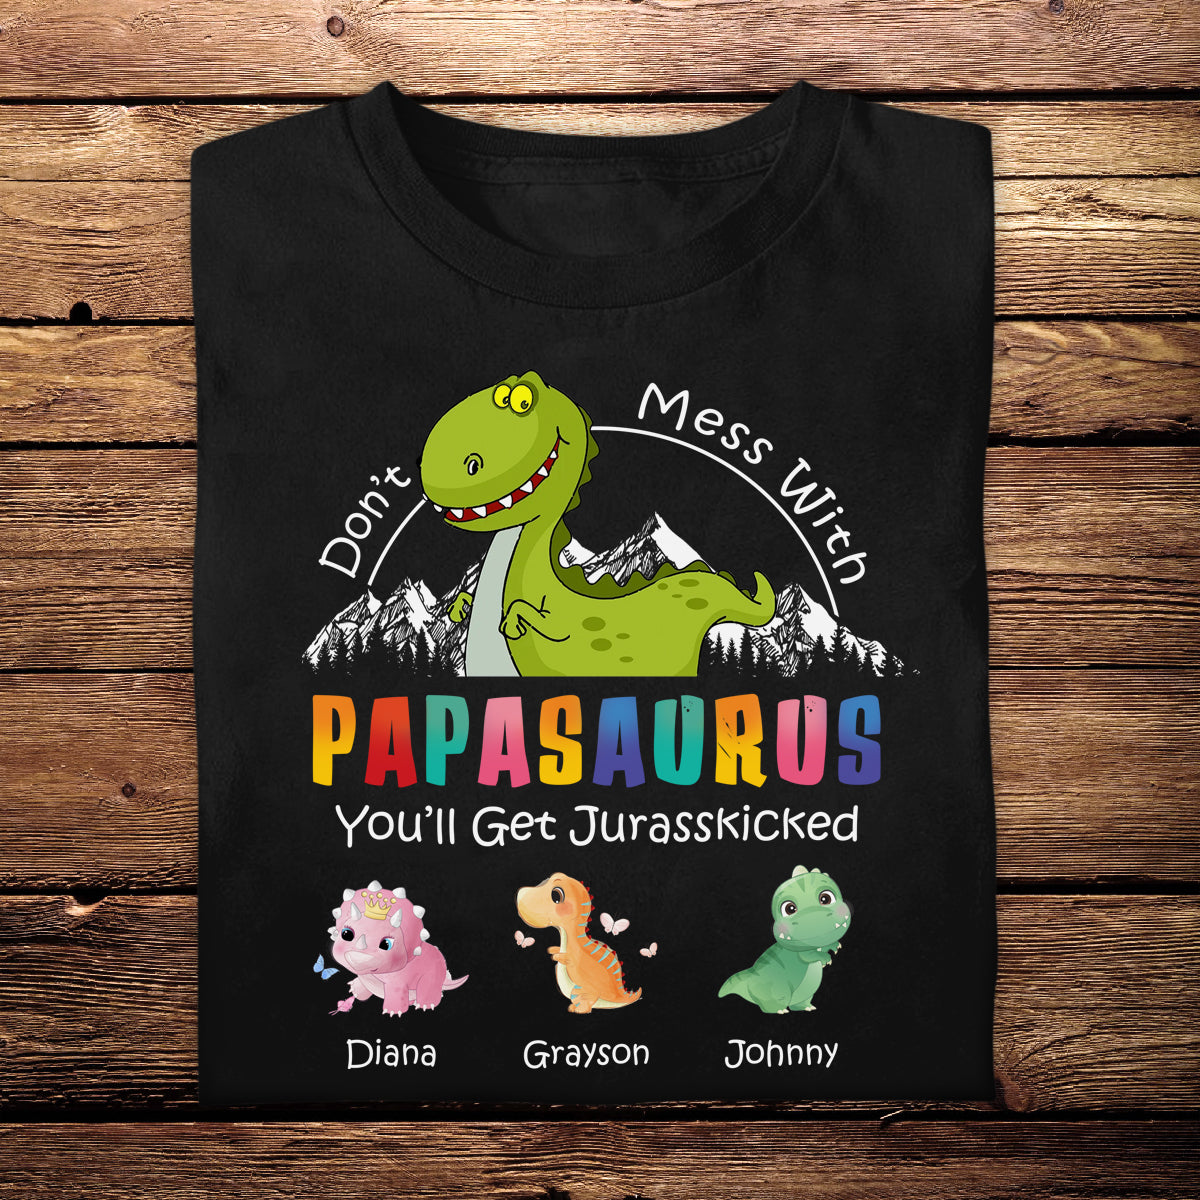 Don't Mess With Papasaurus - Personalized Apparel - Gift For Father, Dad, Grandpa, Father's Day